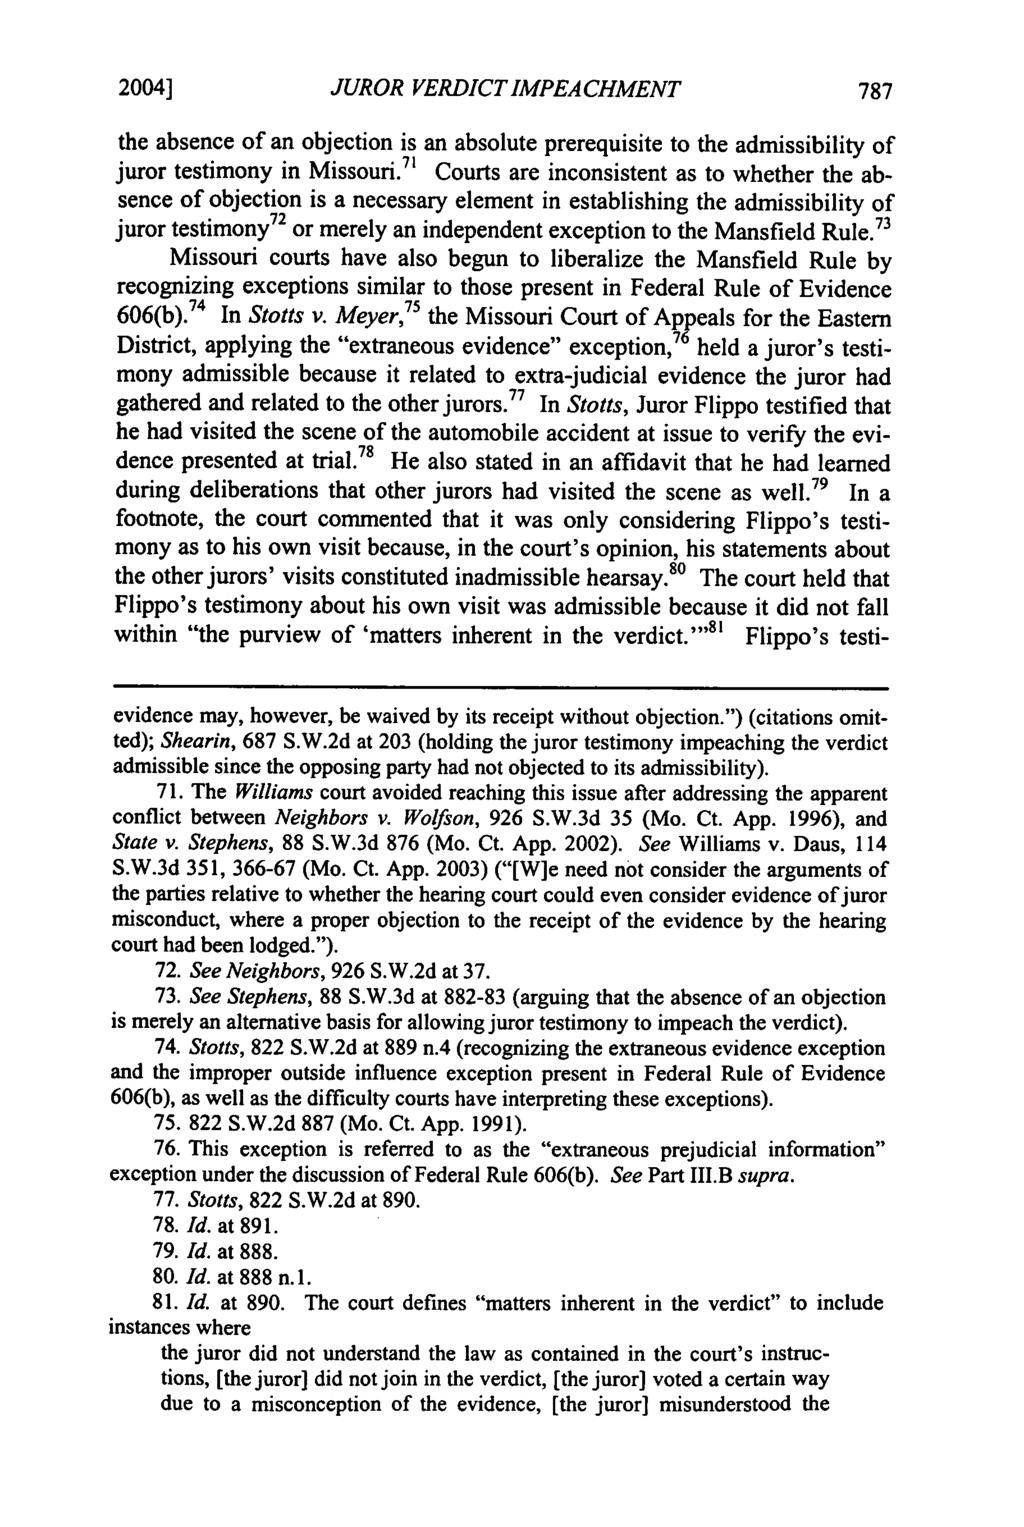 2004] Mudd: Mudd: Liberalizing the Mansfield Rule in Missouri: JUROR VERDICTIMPEACHMENT the absence of an objection is an absolute prerequisite to the admissibility of juror testimony in Missouri.